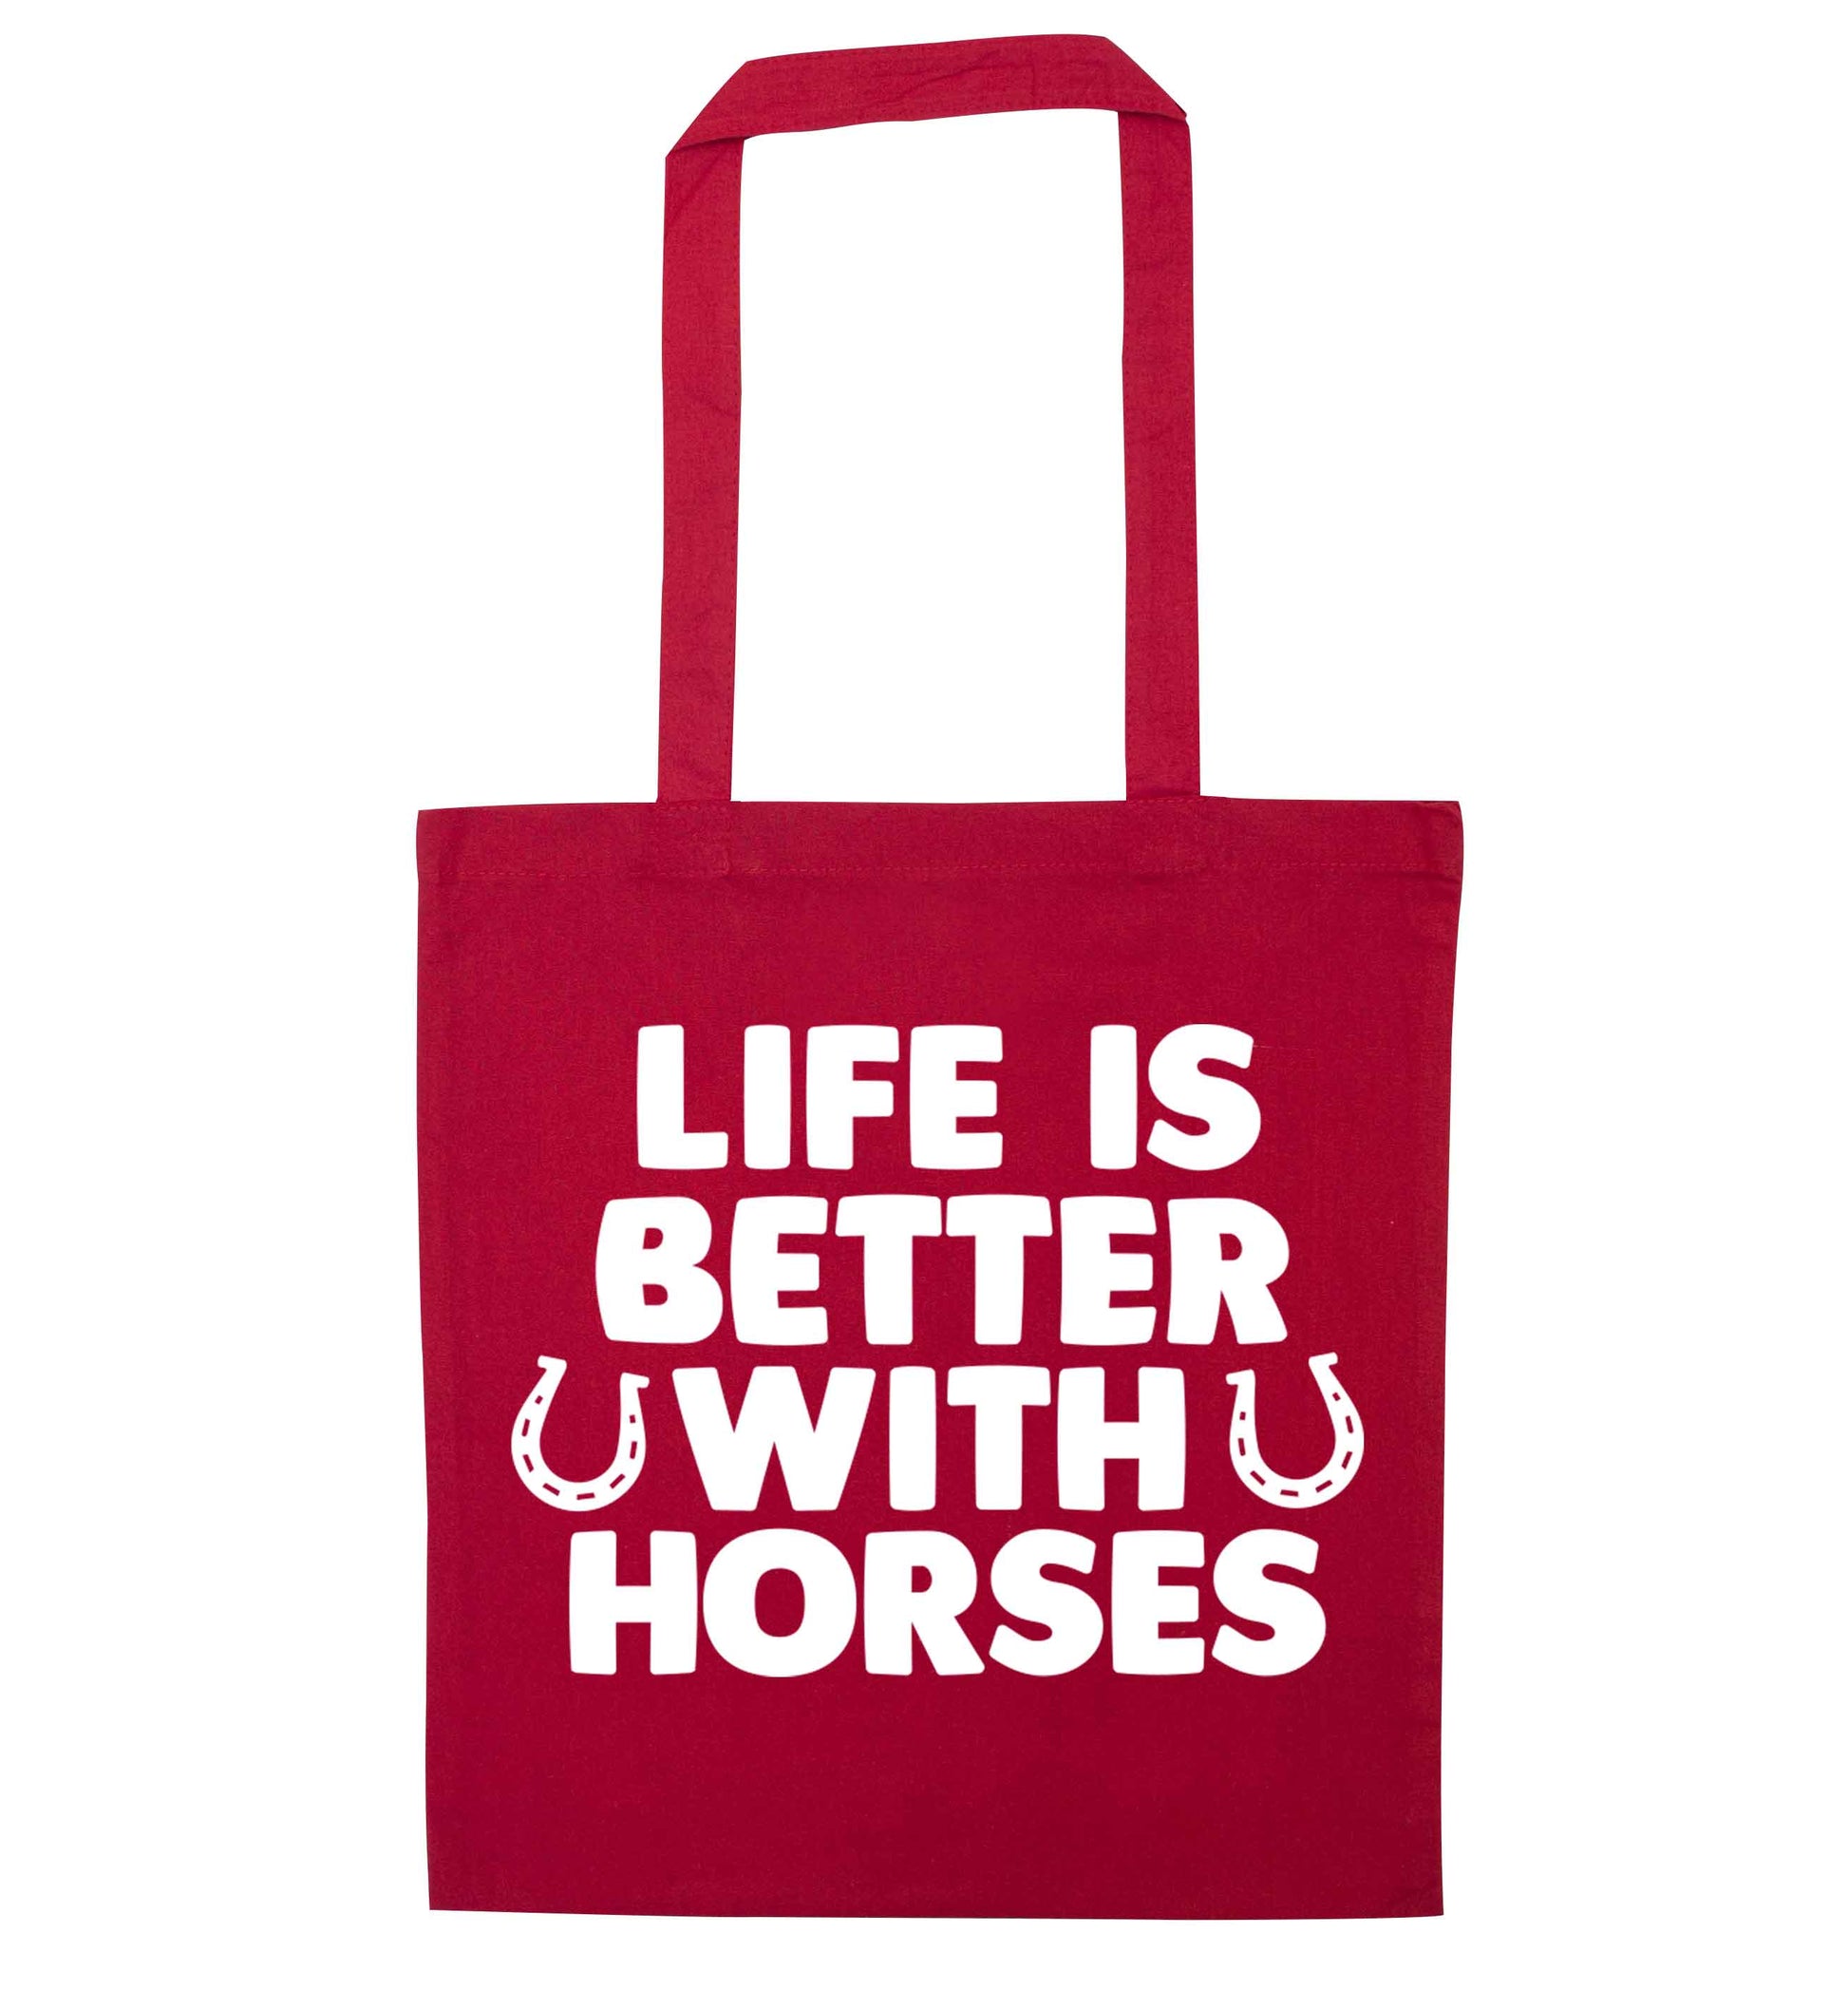 Life is better with horses red tote bag